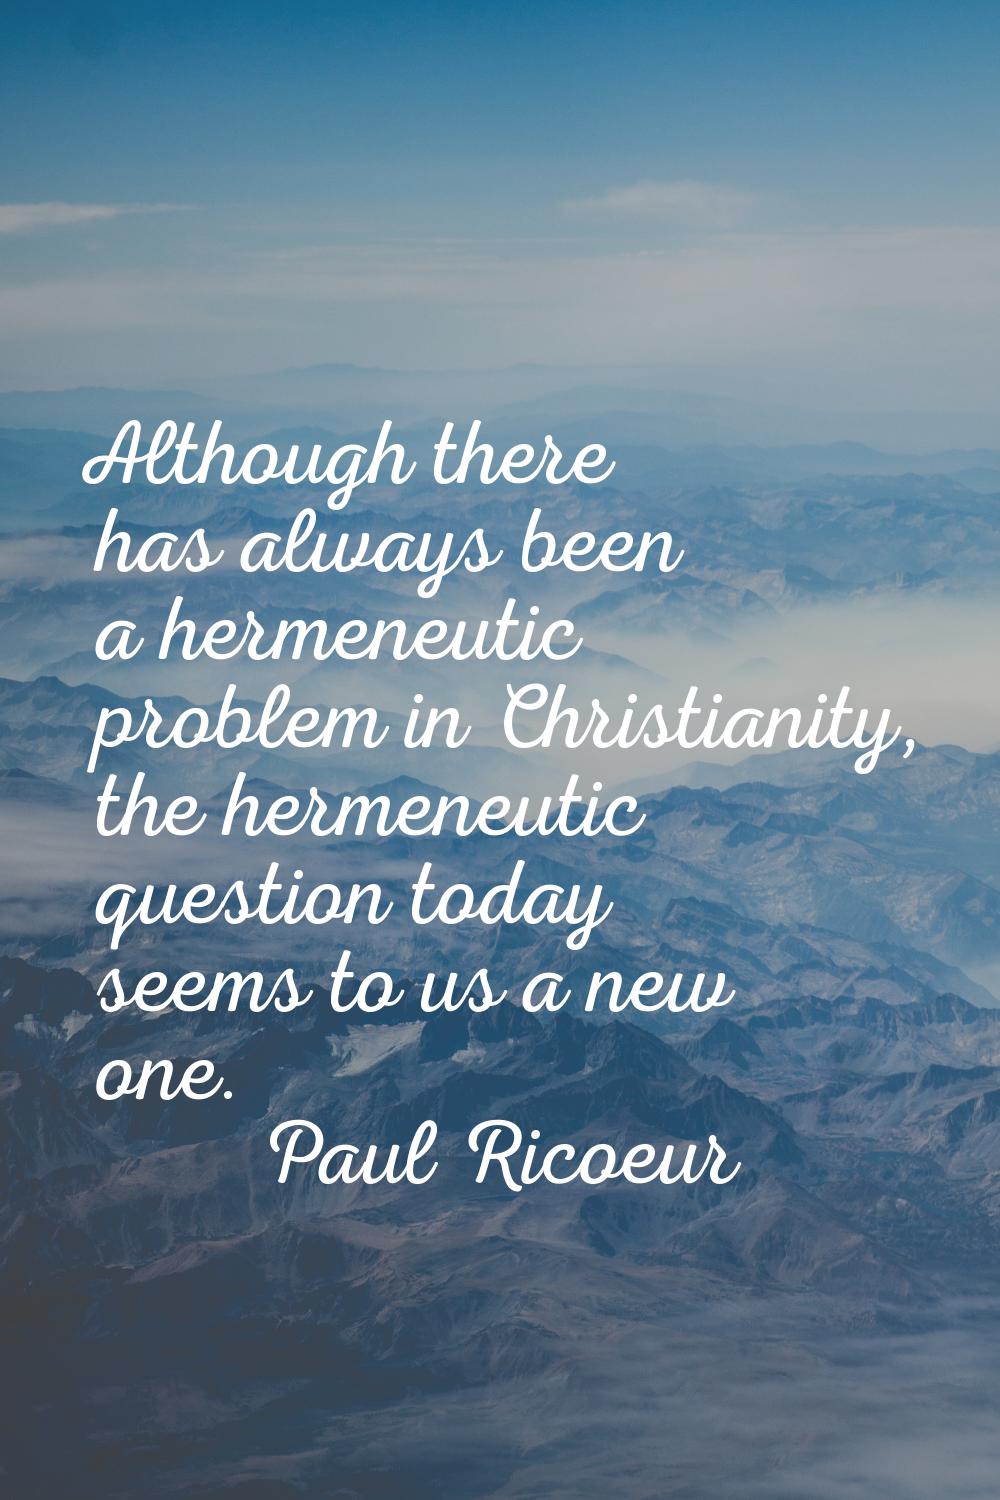 Although there has always been a hermeneutic problem in Christianity, the hermeneutic question toda